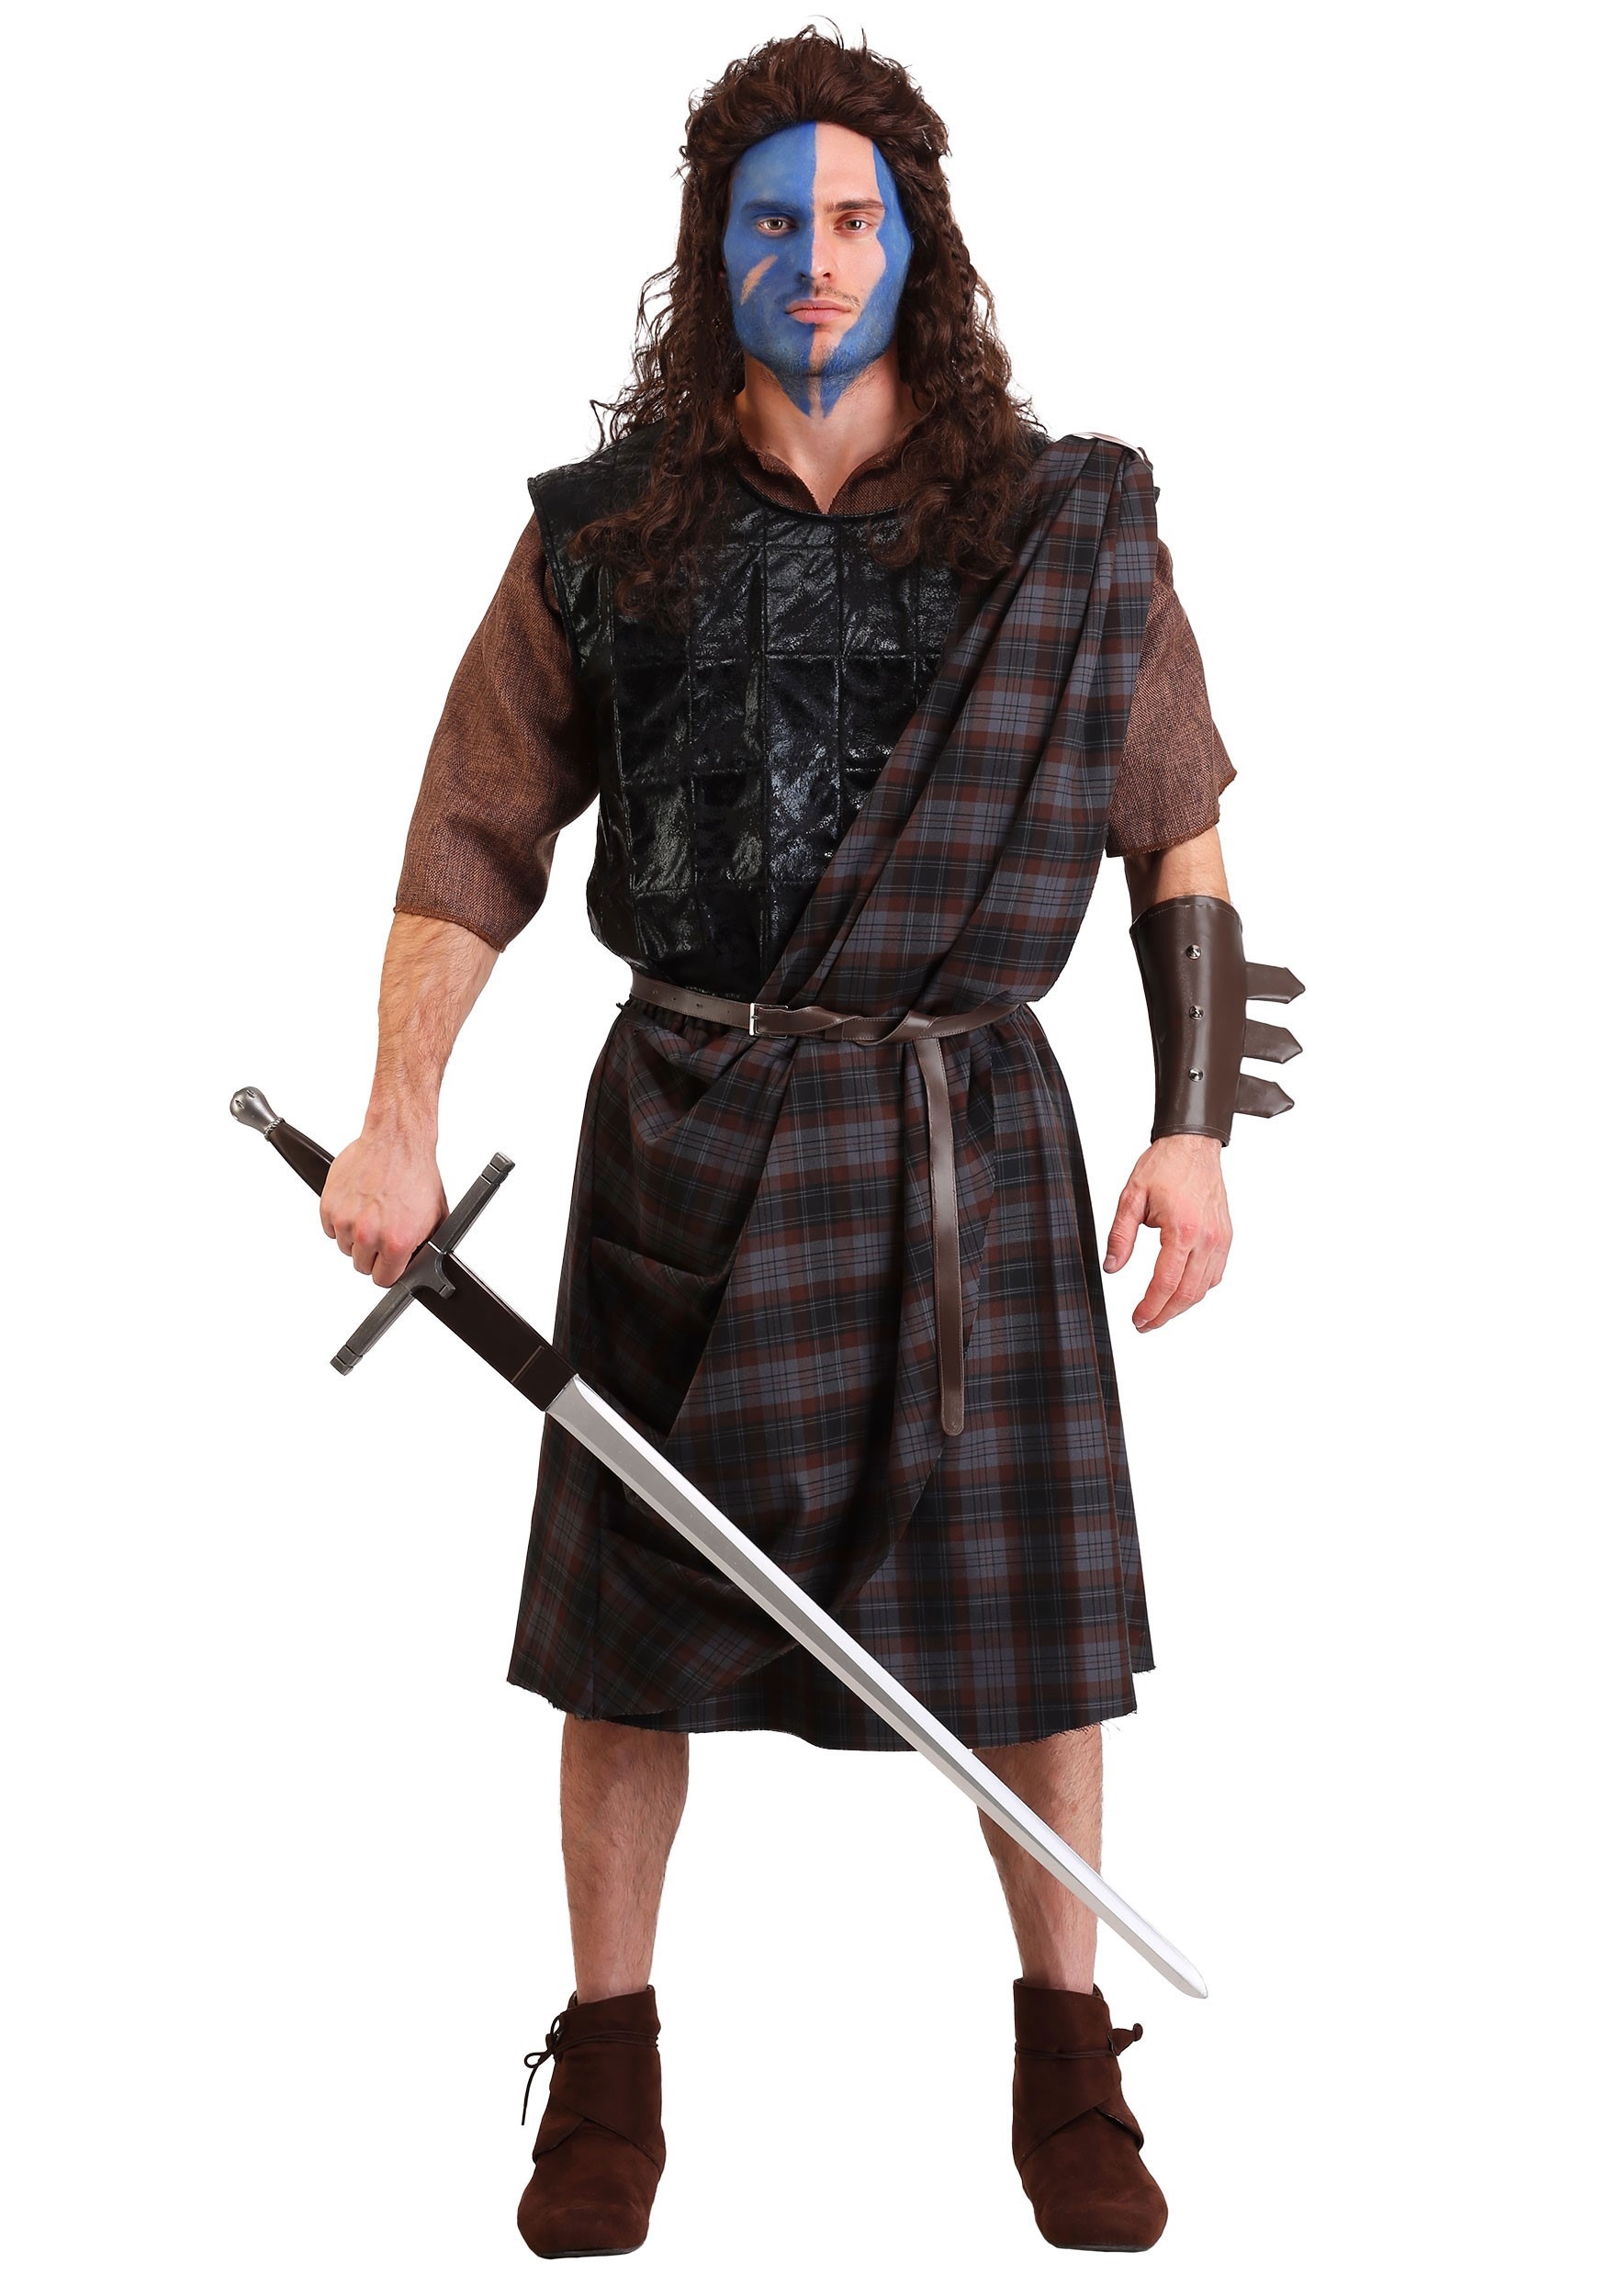 Photos - Fancy Dress Classic FUN Costumes Braveheart  Costume Men's | TV and Movie Costumes Brow 